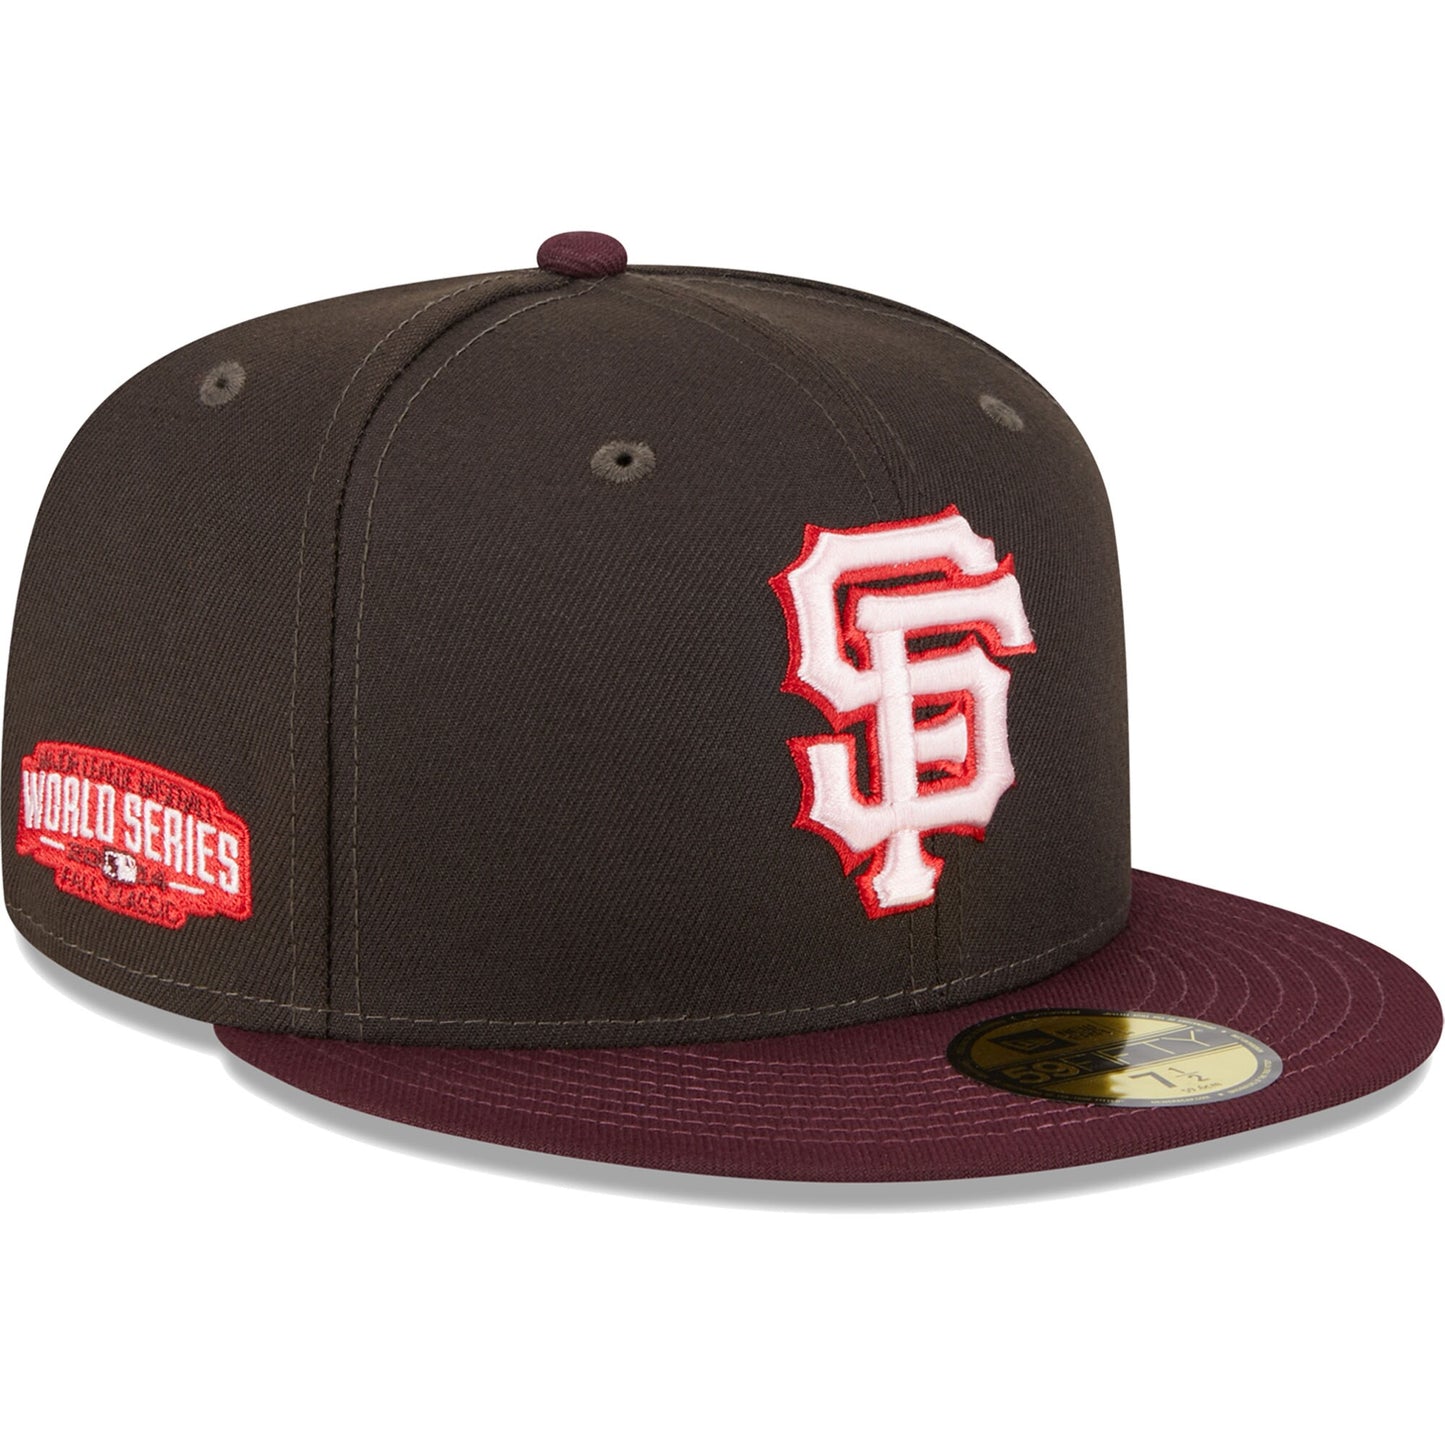 San Francisco Giants New Era Chocolate Strawberry 59FIFTY Fitted Hat - Brown/Maroon